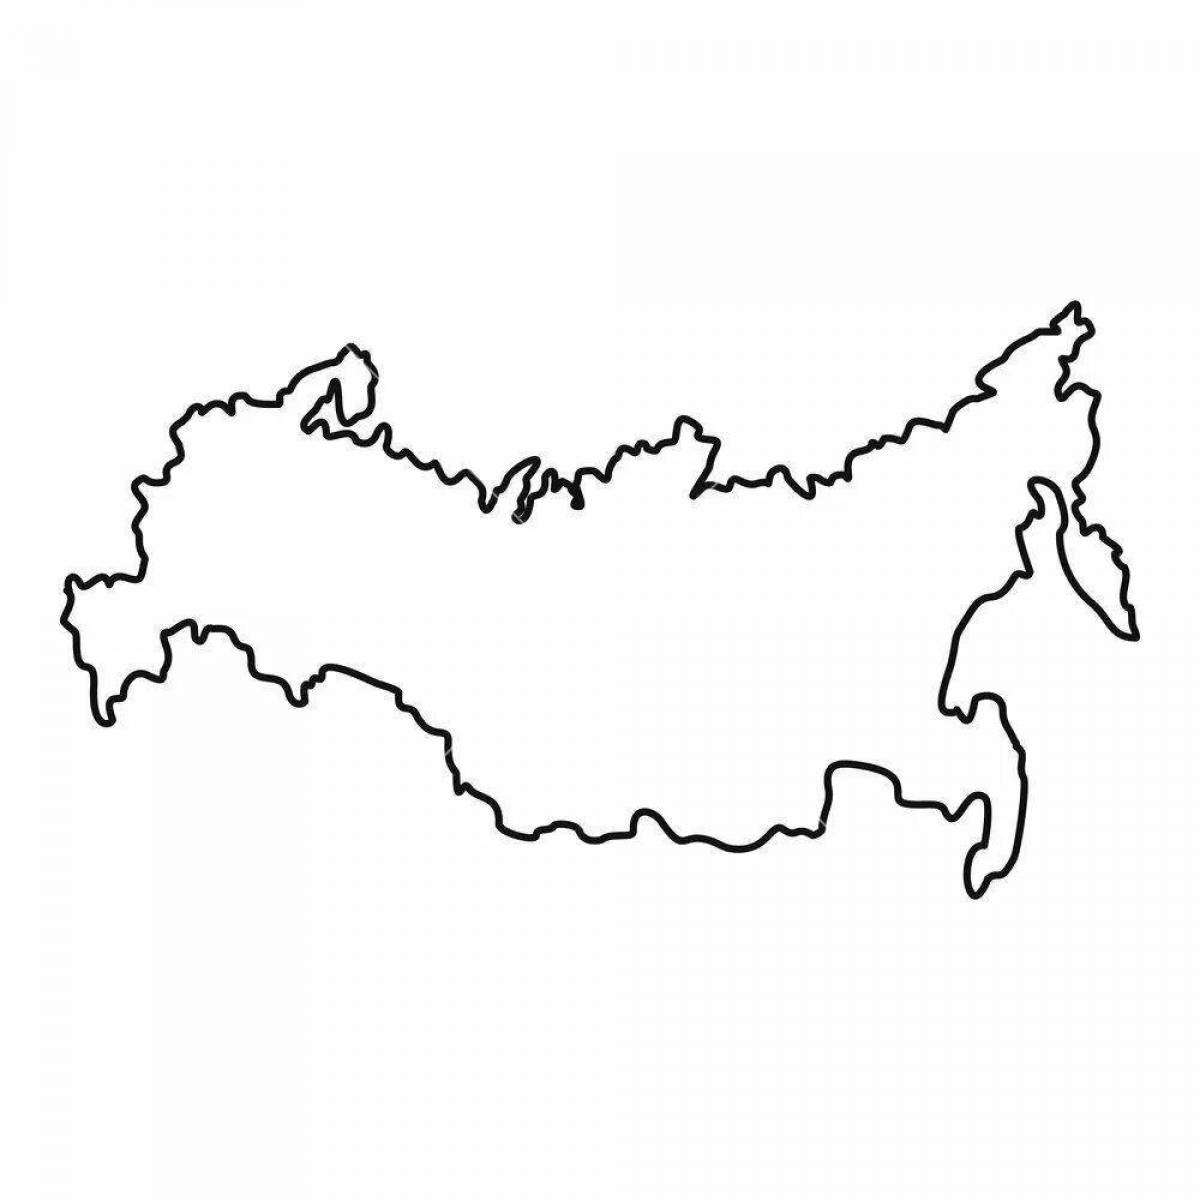 map of Russia puzzle online from photo